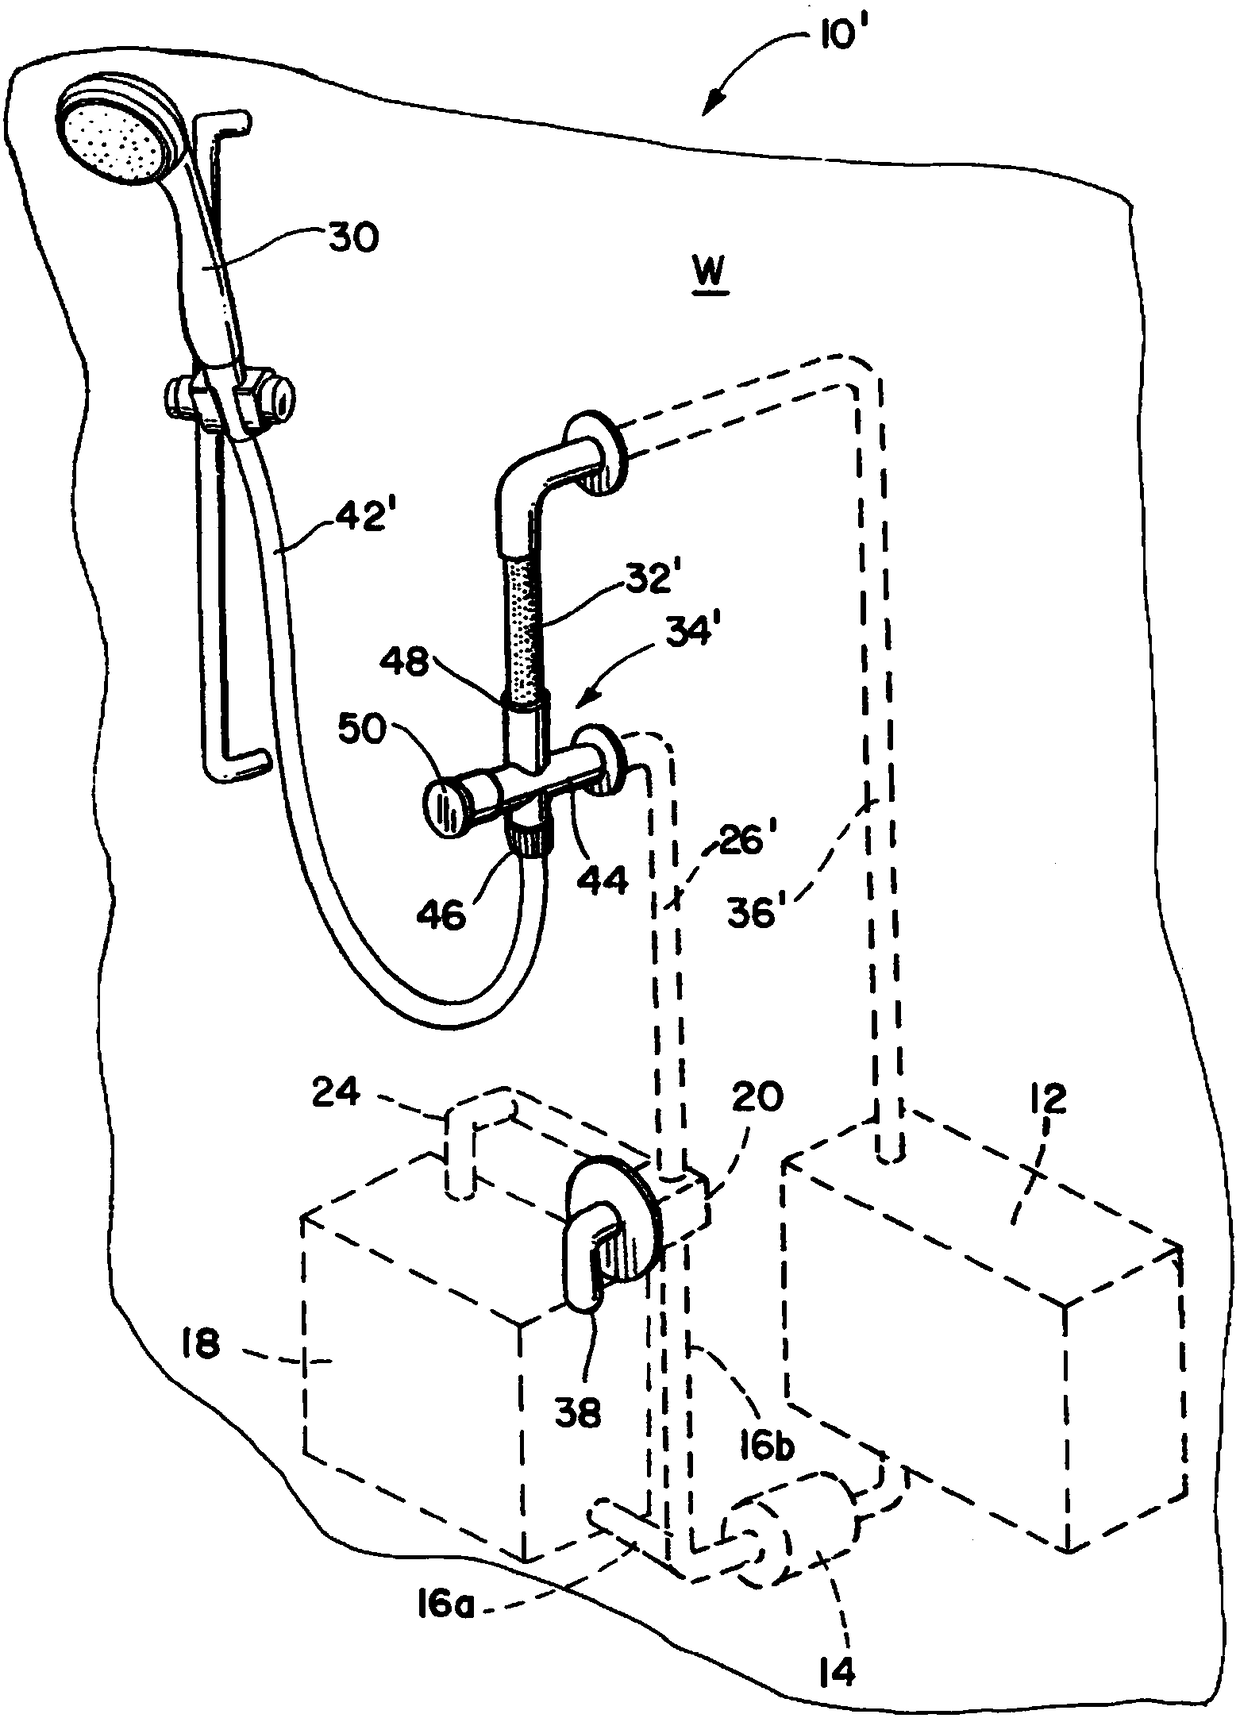 Water conserving shower system and thermochromic fixtures used therein